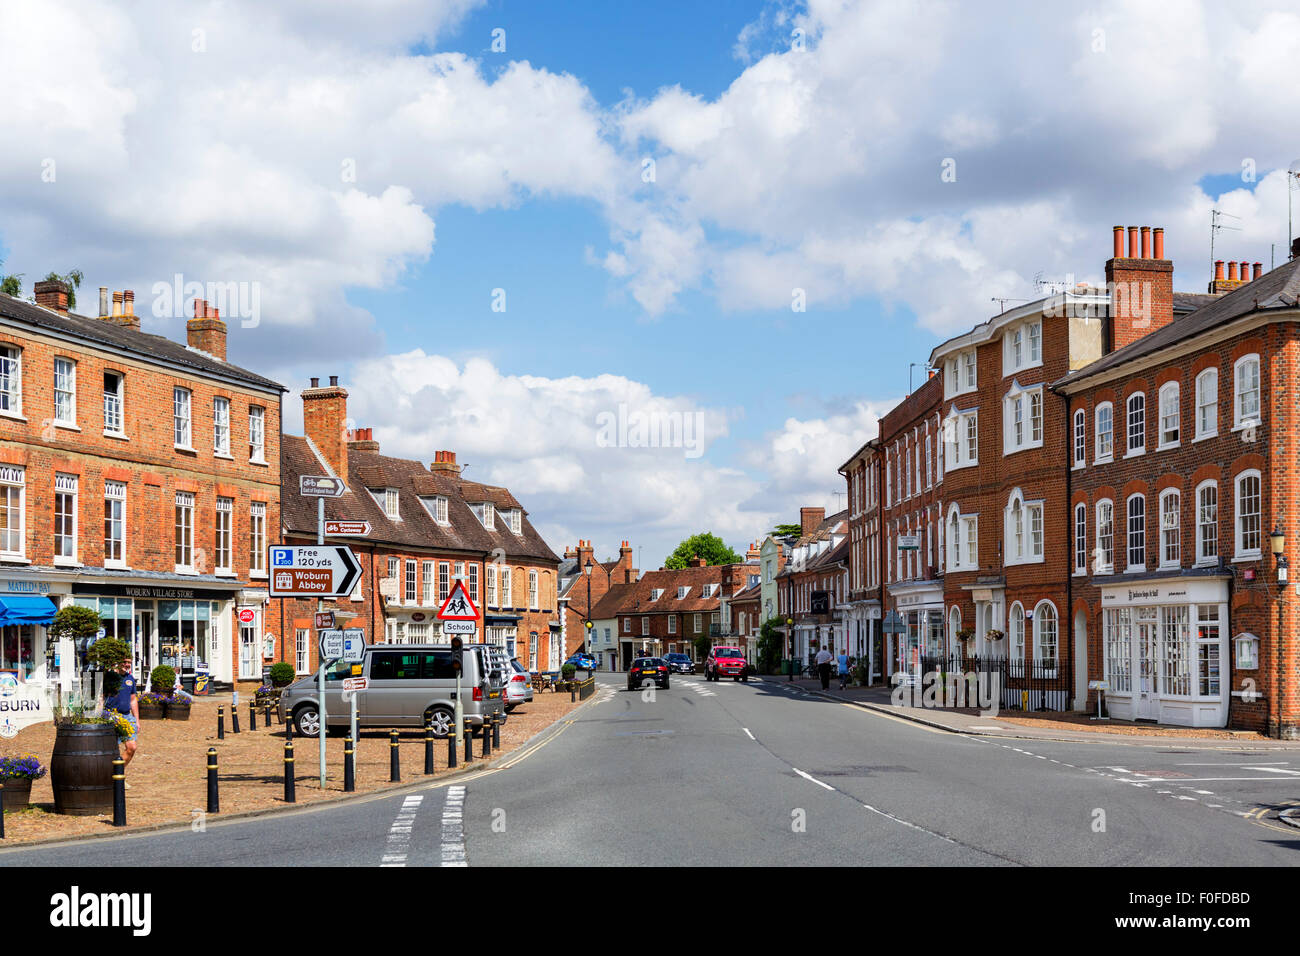 The High Street in Woburn, Bedfordshire, England, UK Stock Photo